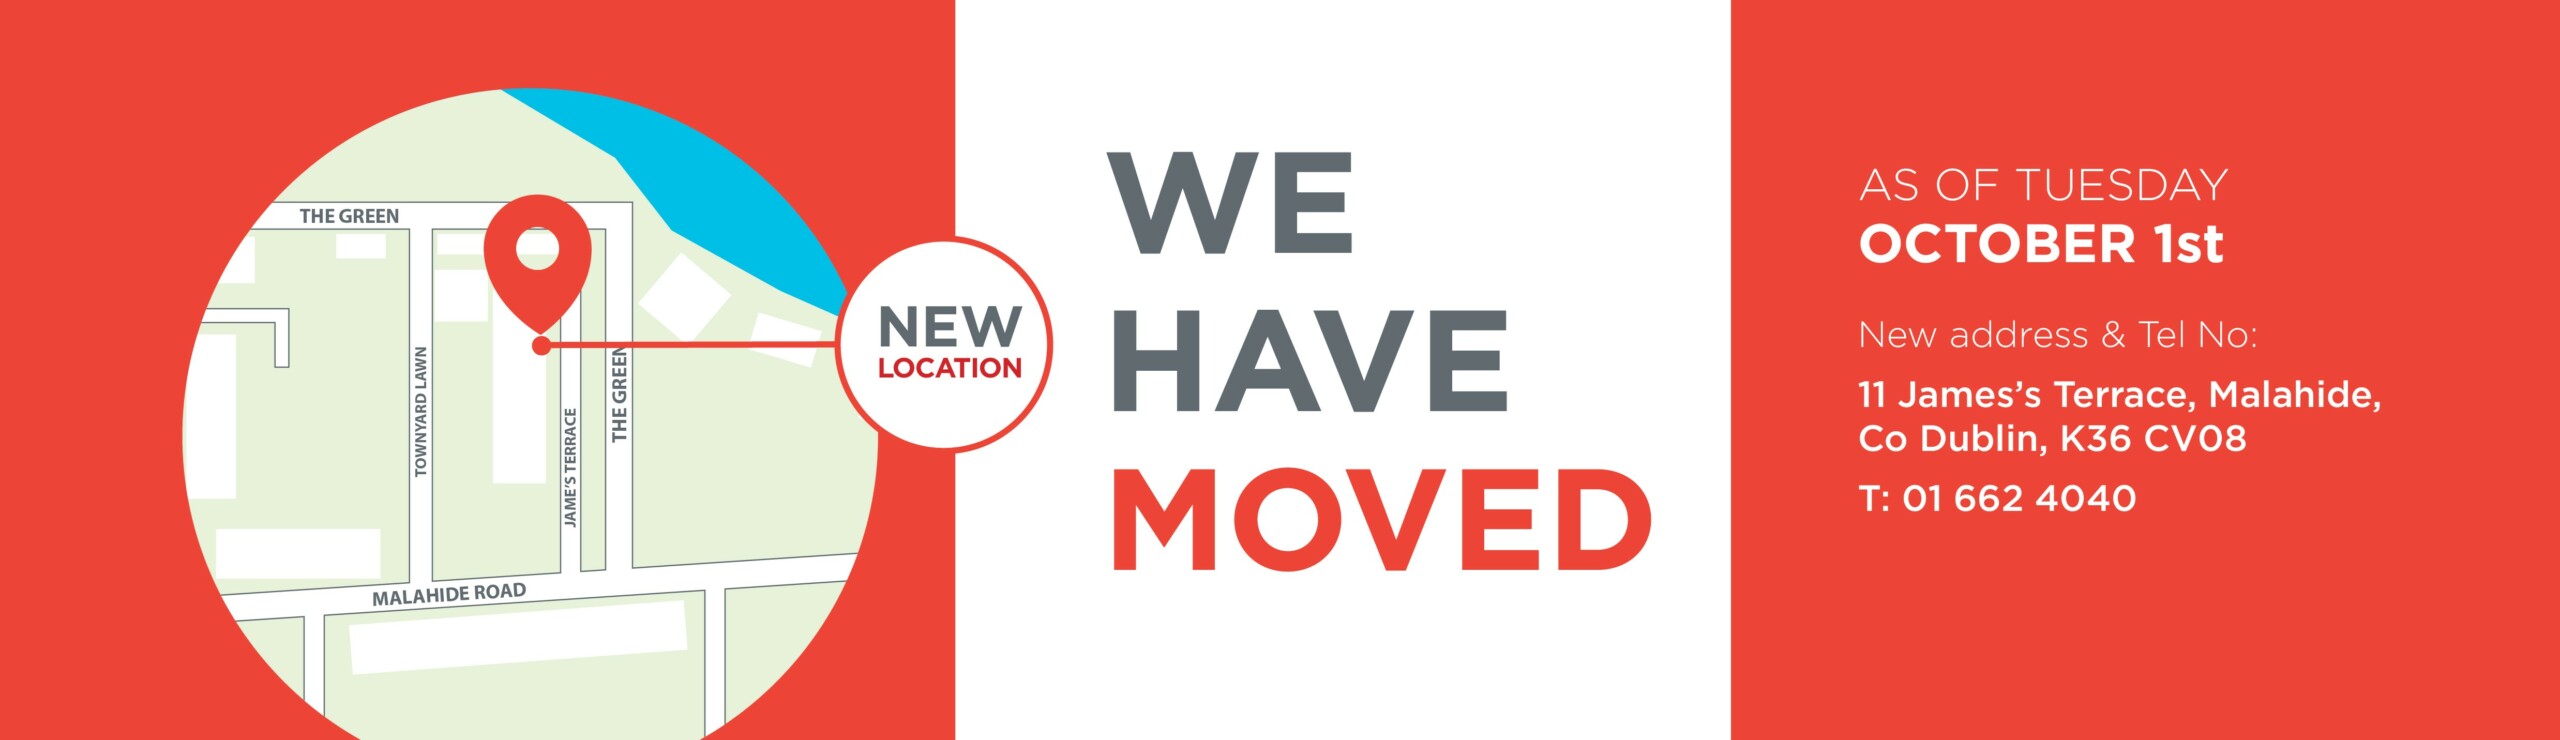 We-have-moved